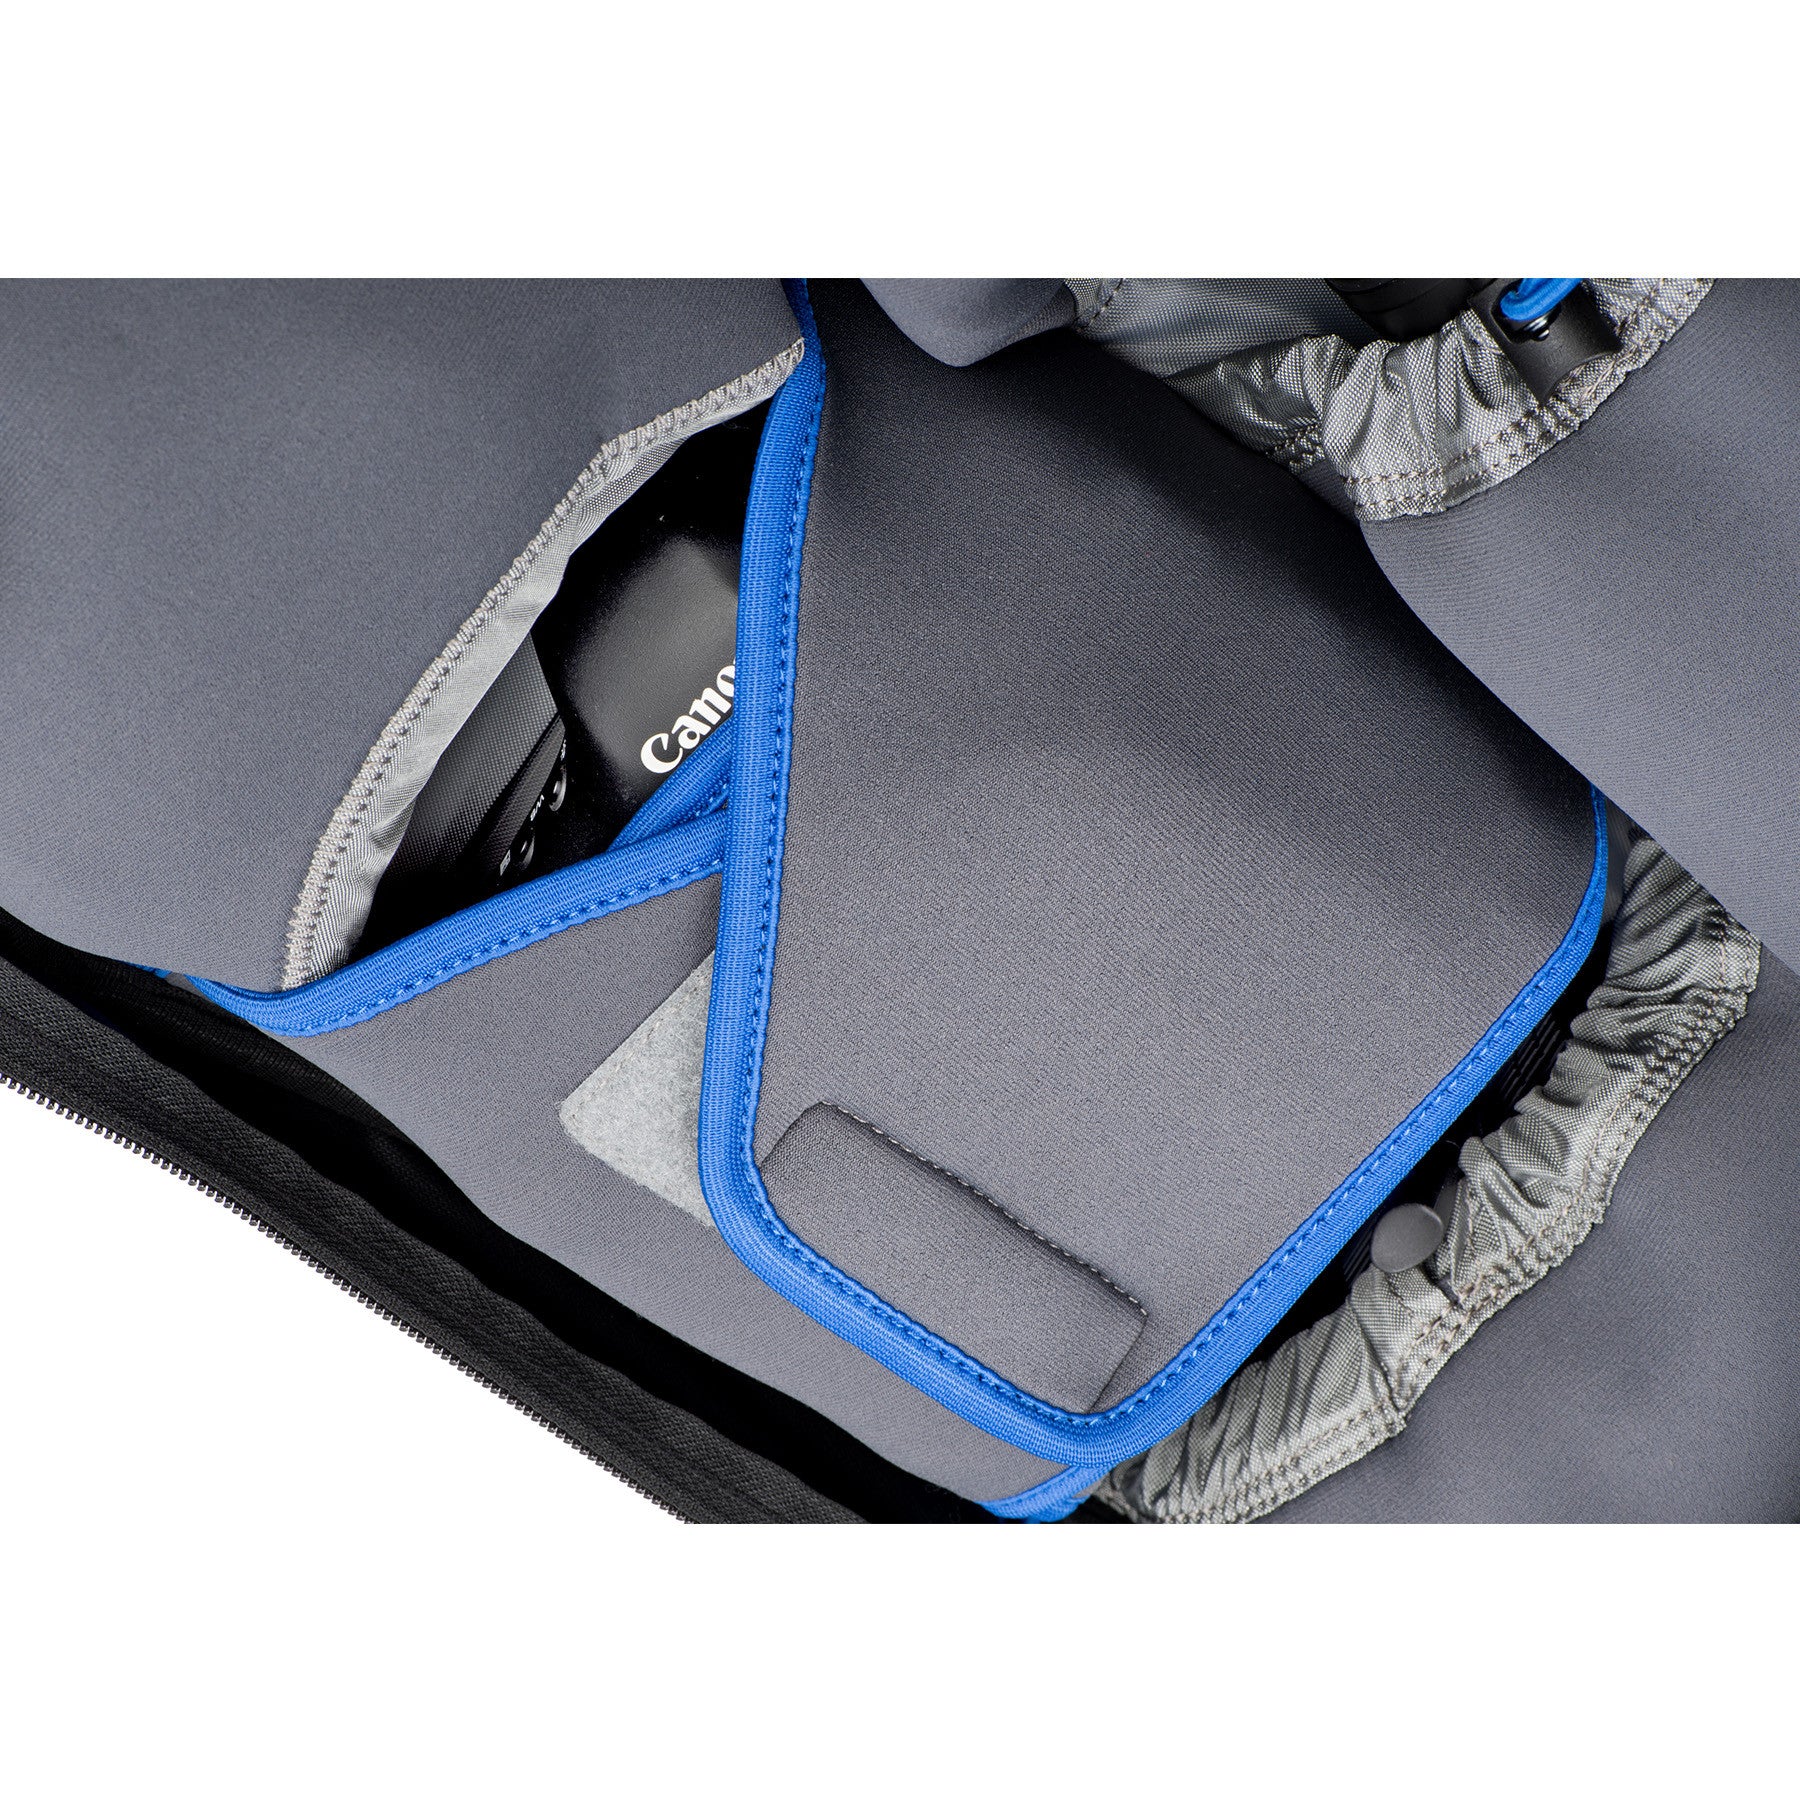 Neoprene pockets and wrap for cameras, lenses or personal items